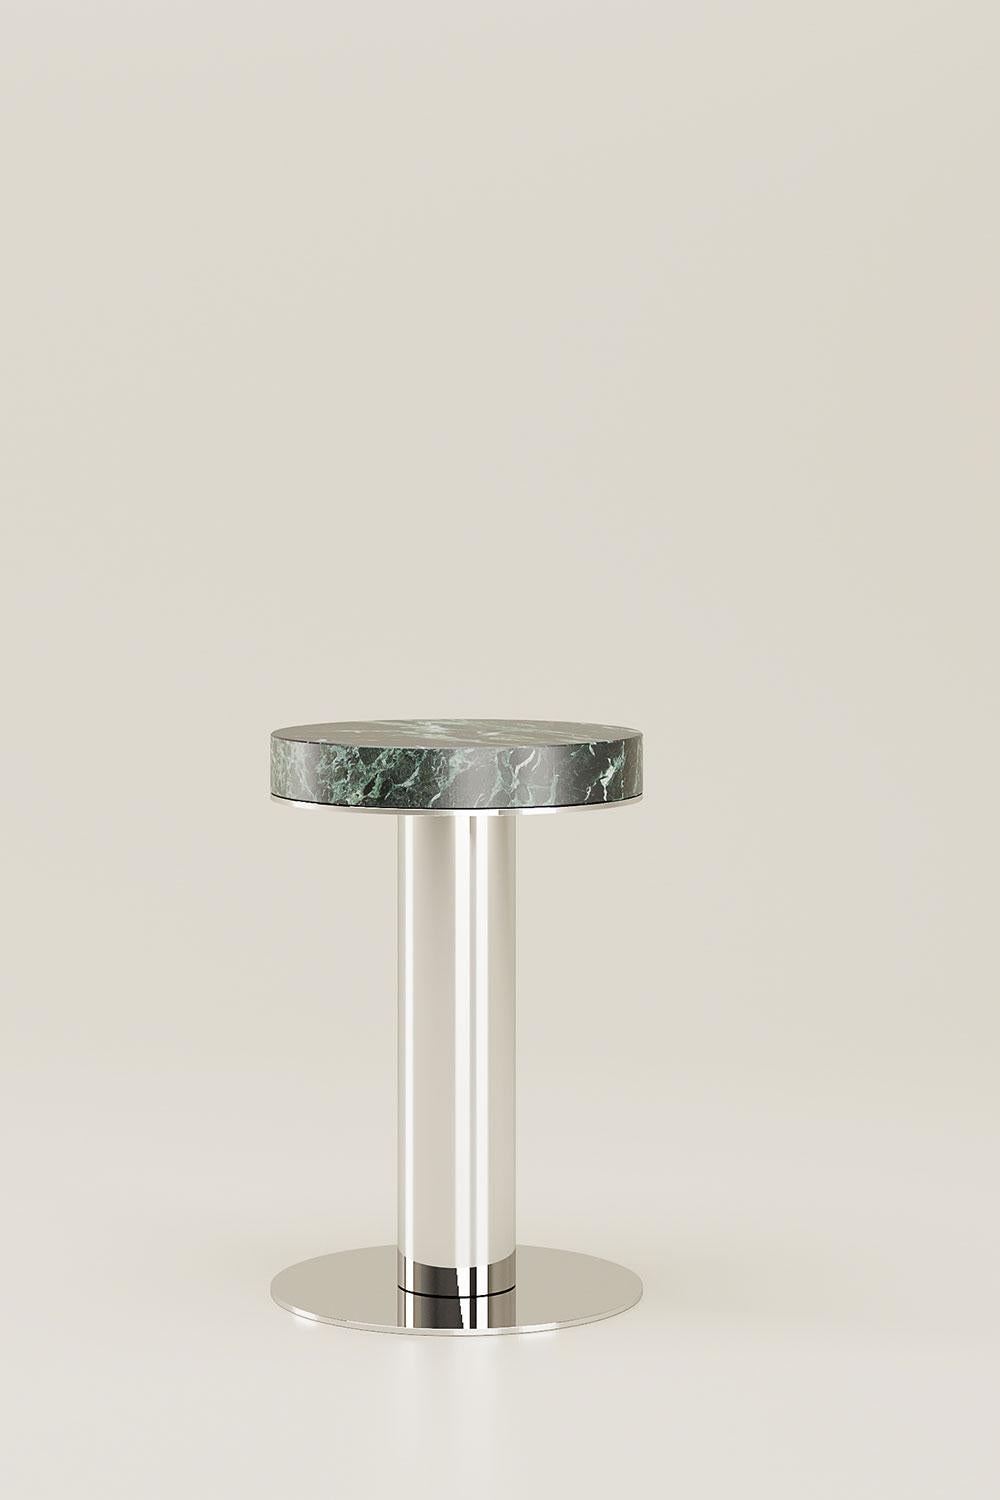 Verde Alpi Nail Side Table by Andrea Bonini
Limited Edition
Dimensions: Ø 35 x H 60 cm.
Materials: Verde Alpi marble and polished steel. 

Made in Italy. Limited series, numbered and signed pieces. Custom size or finish on request.  Also available